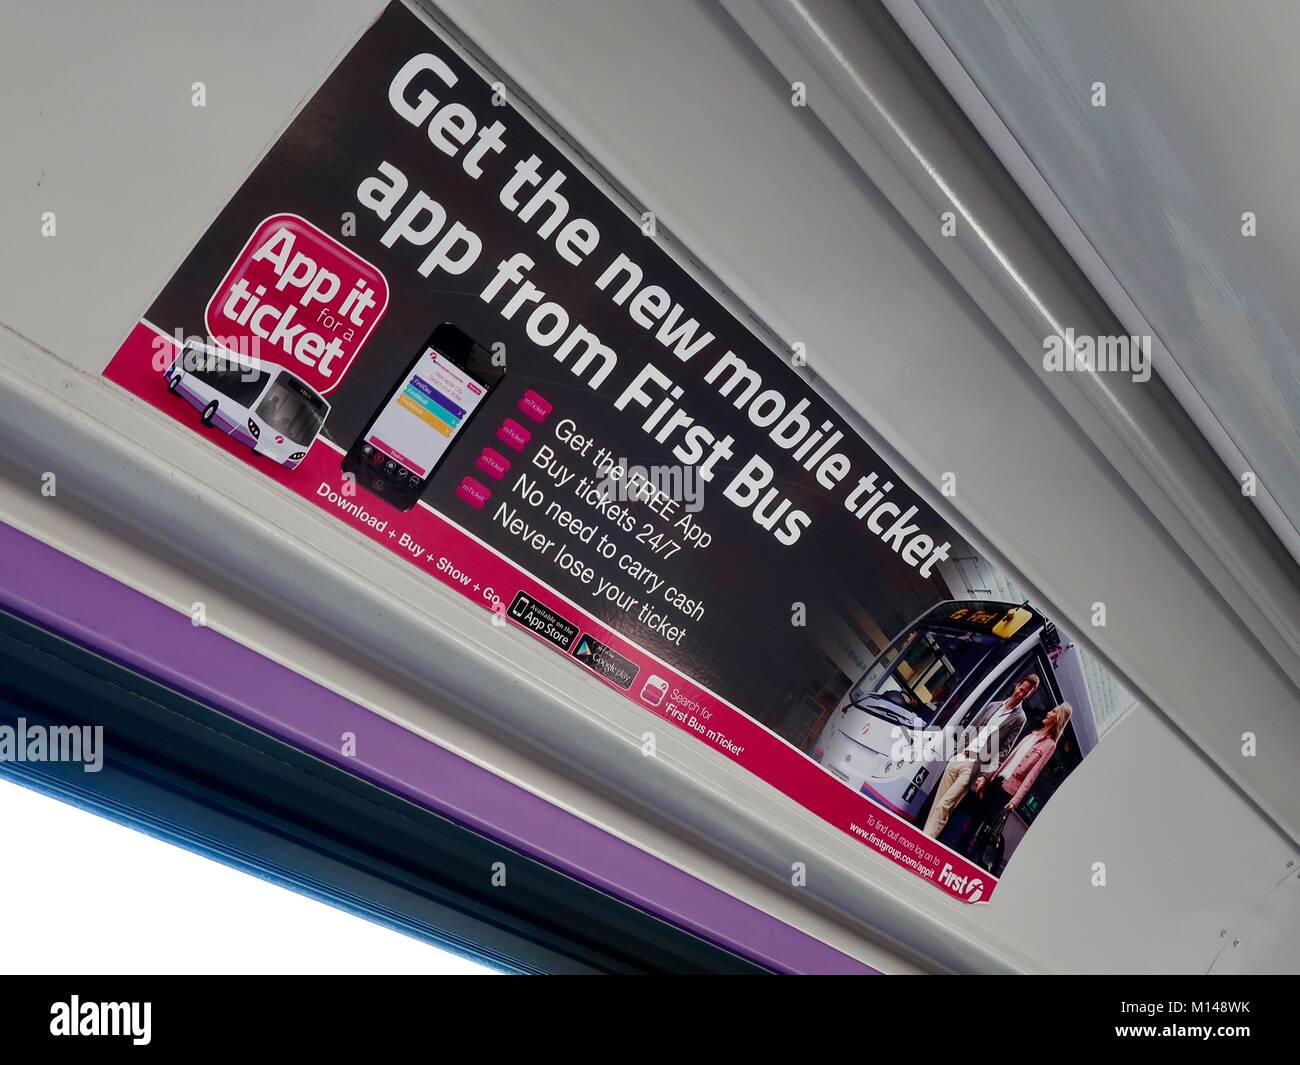 Advert on an Ipswich bus for ticketless travel. User buys a virtual ticket via an app and shows their phone to the bus driver on entry. Stock Photo